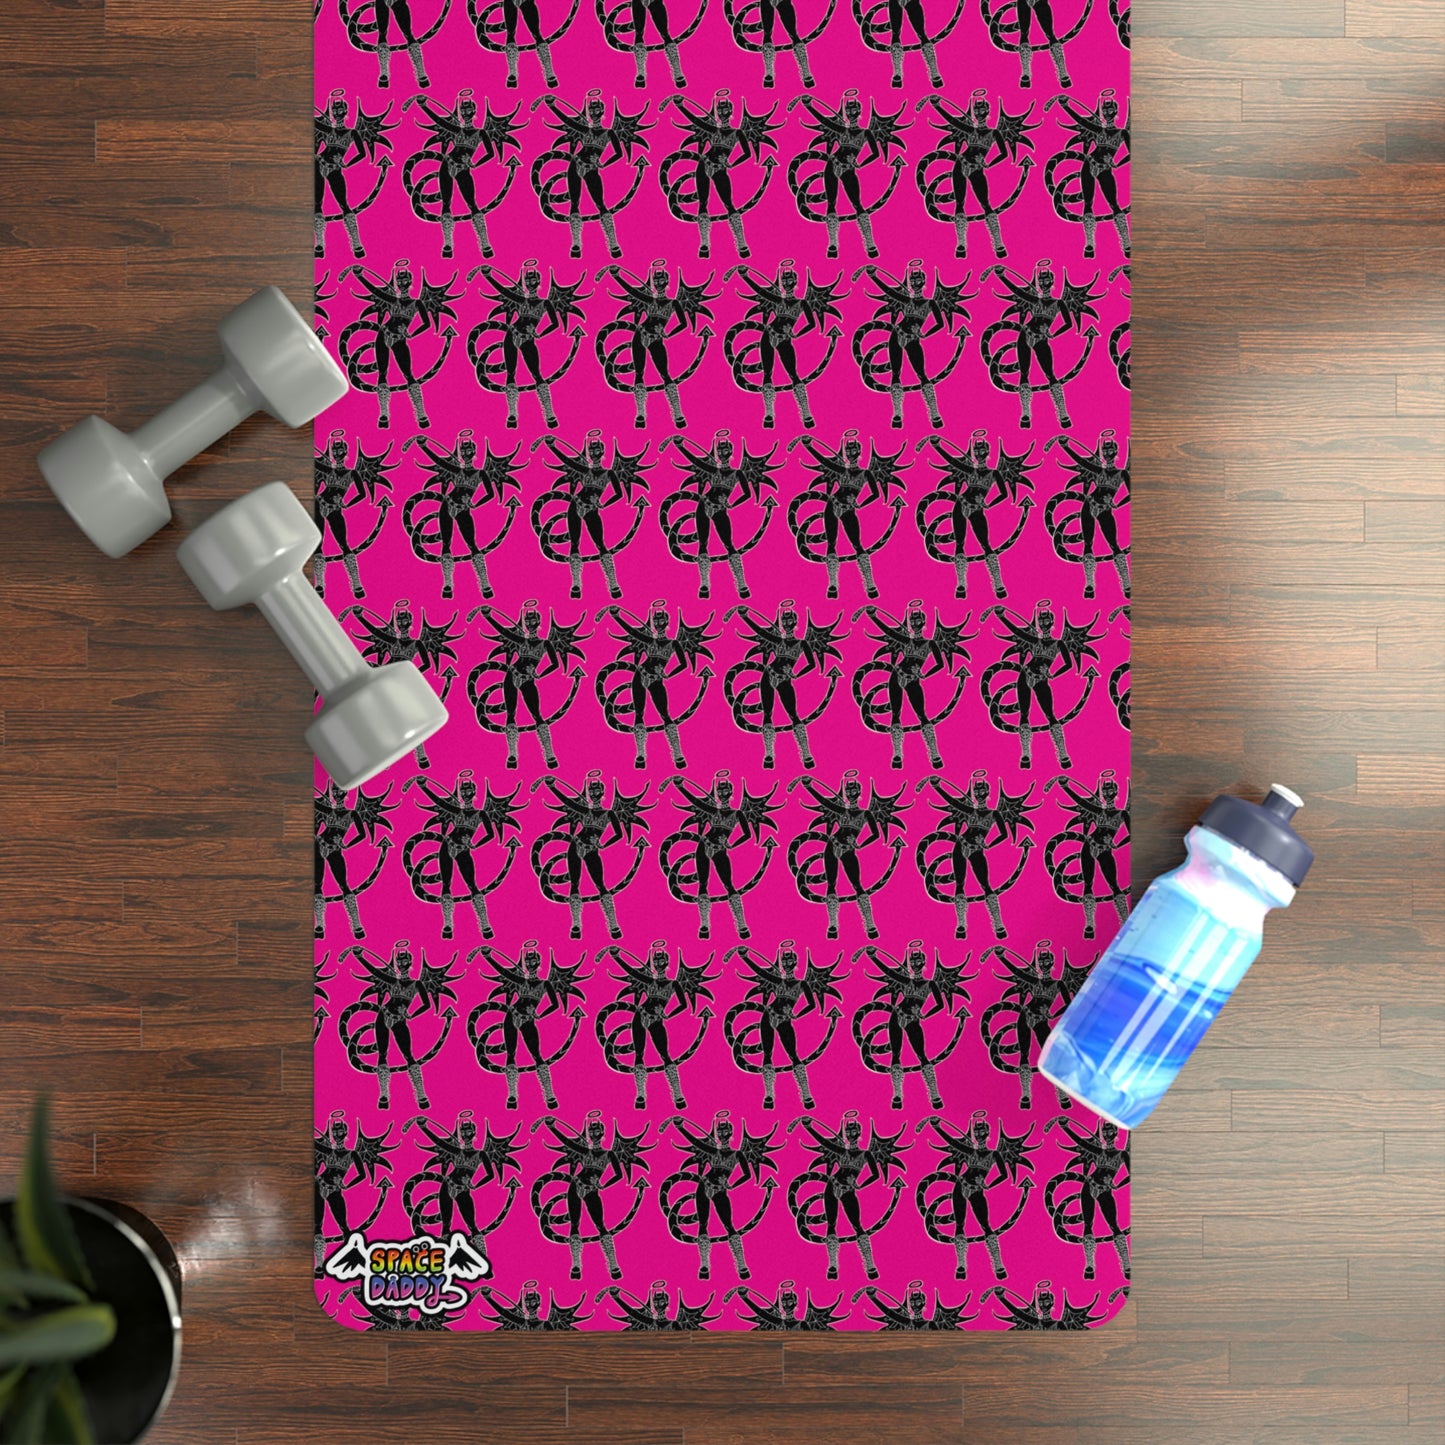 Space Daddy Naughty Angel Rubber Yoga Mat